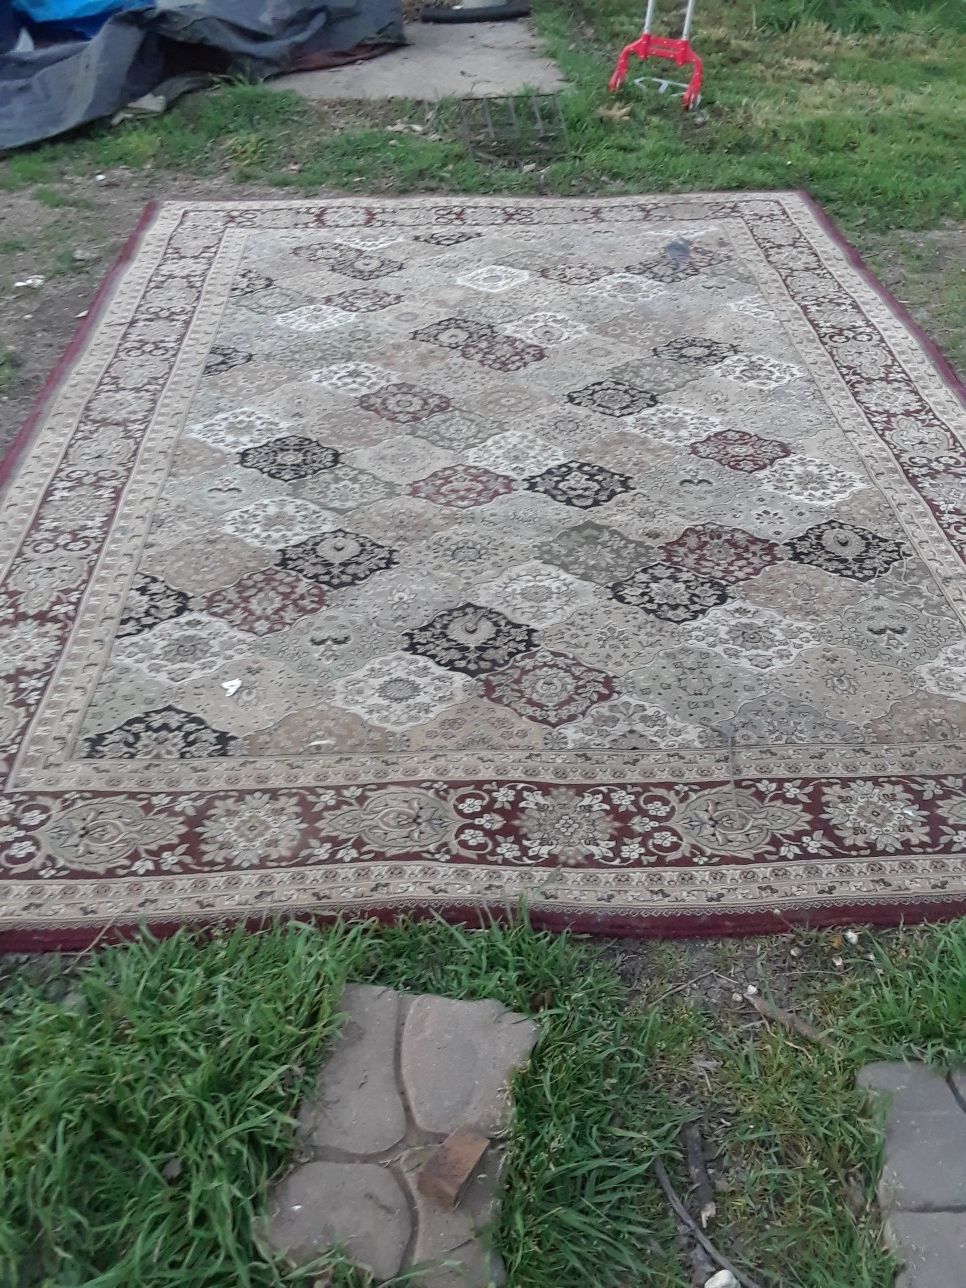 61/2 ft. Area Rug $25.00 cash only (serious buyers)